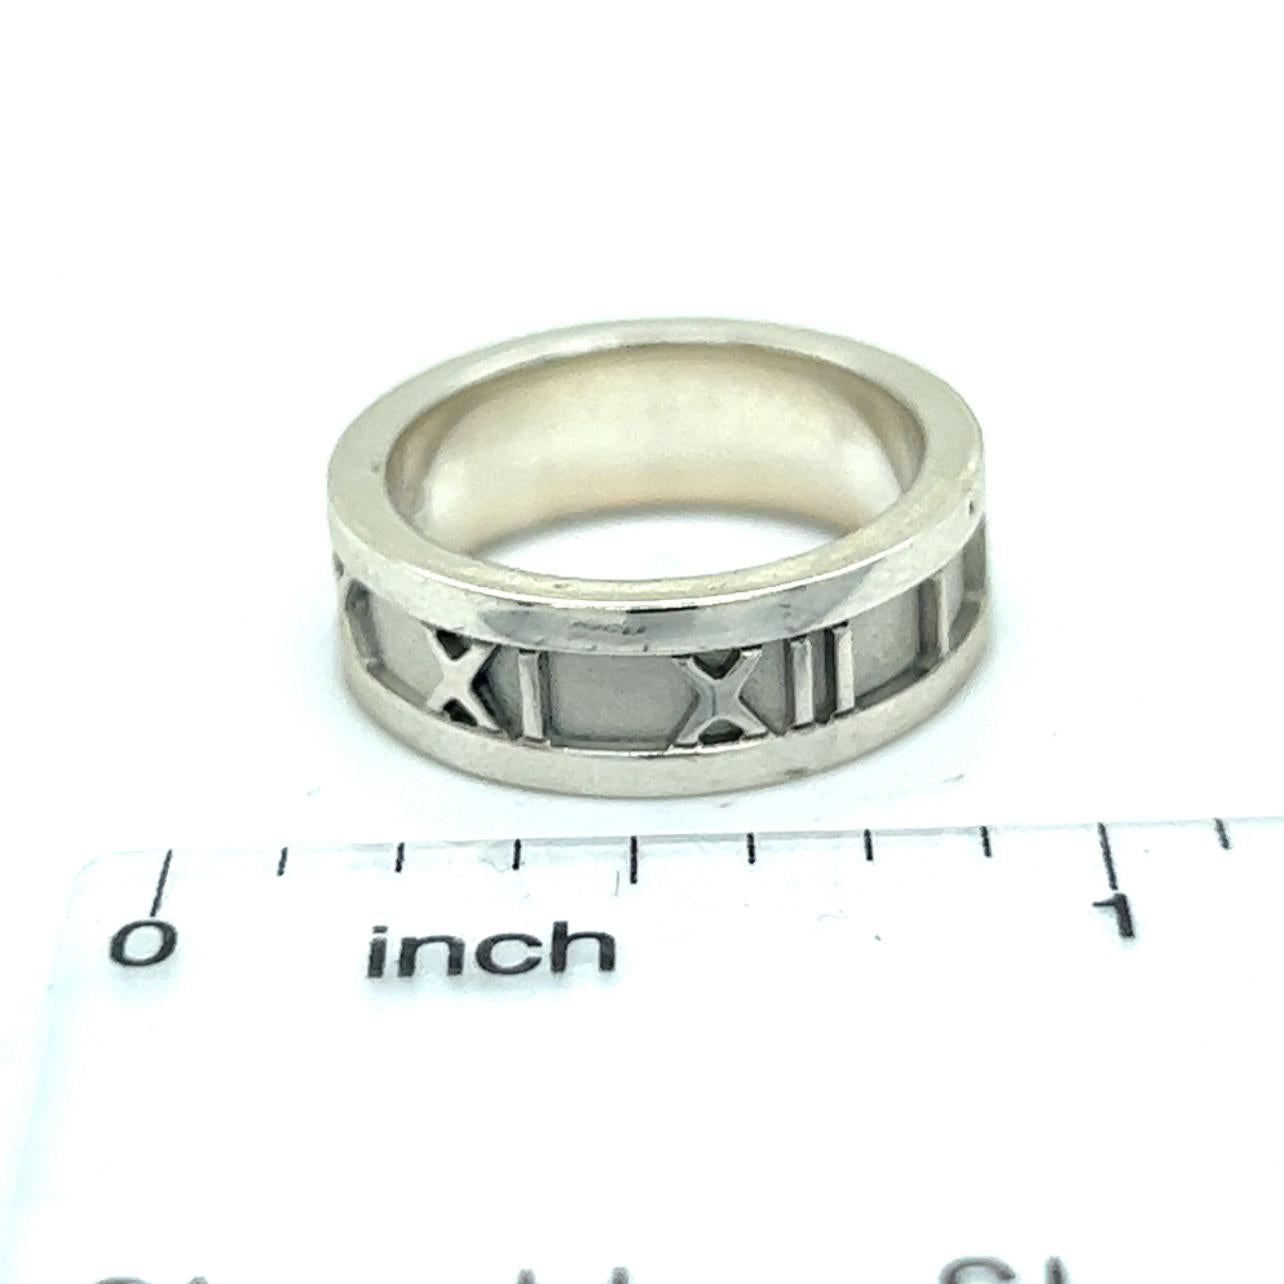 Authentic Tiffany & Co Estate Atlas Ring Size 6.5 Silver 6 mm TIF383

TRUSTED SELLER SINCE 2002

DETAILS
Ring Size: 6.5
Height: 6 mm
Metal: Sterling Silver

We try to present our estate items as best as possible and most have been newly polished